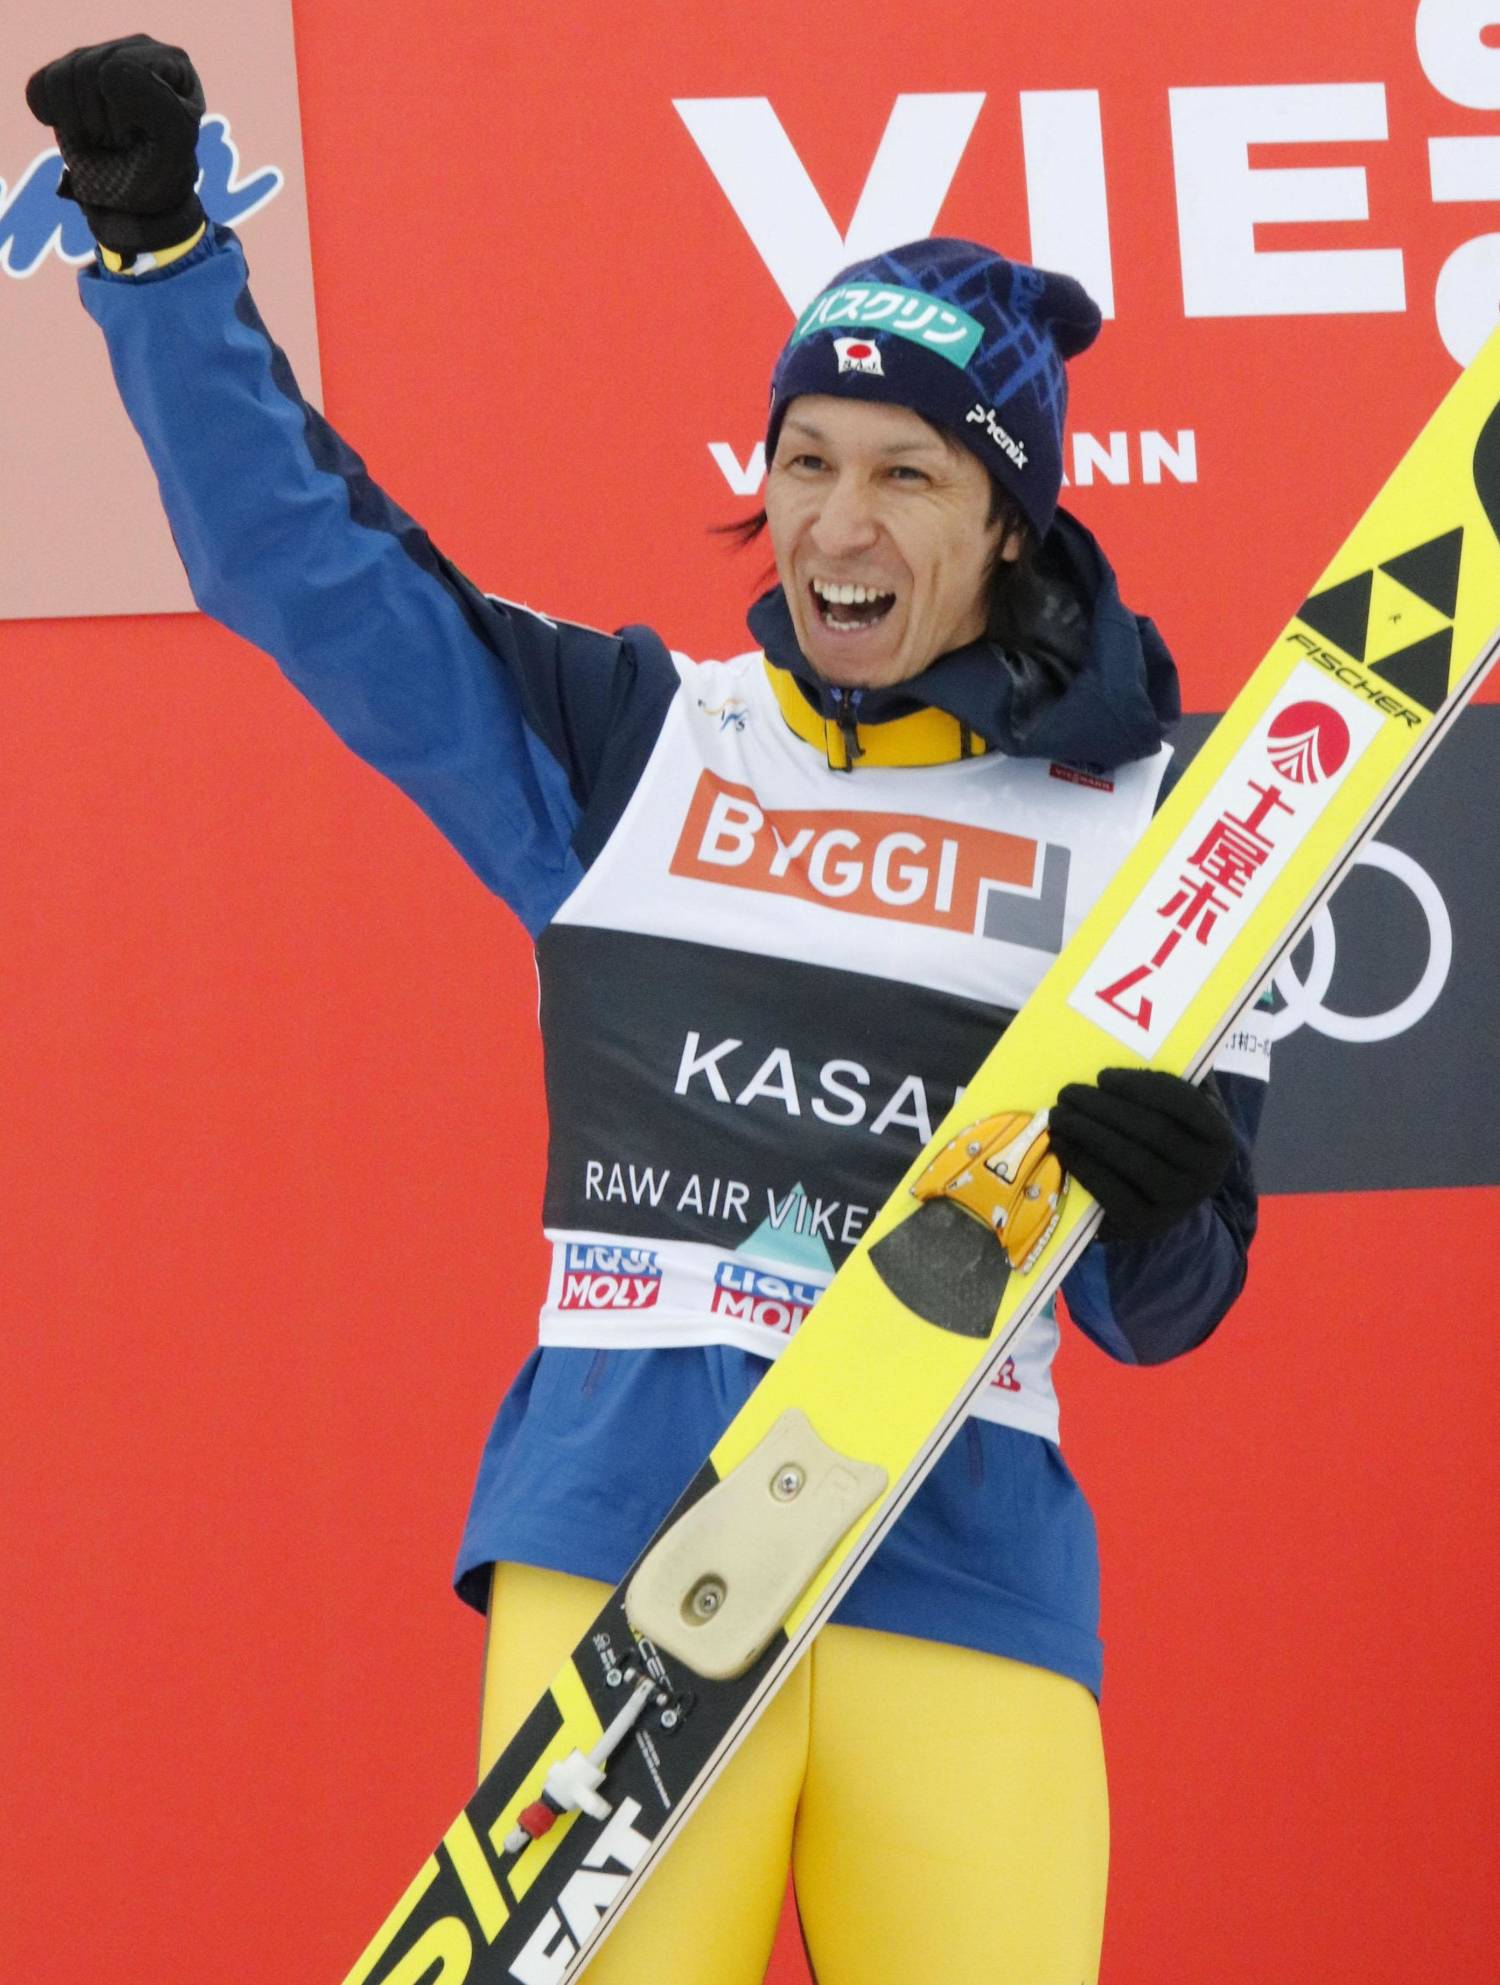 Kasai Updates Own Ski Jumping Age Record The Japan Times regarding ski jumping kasai regarding Residence